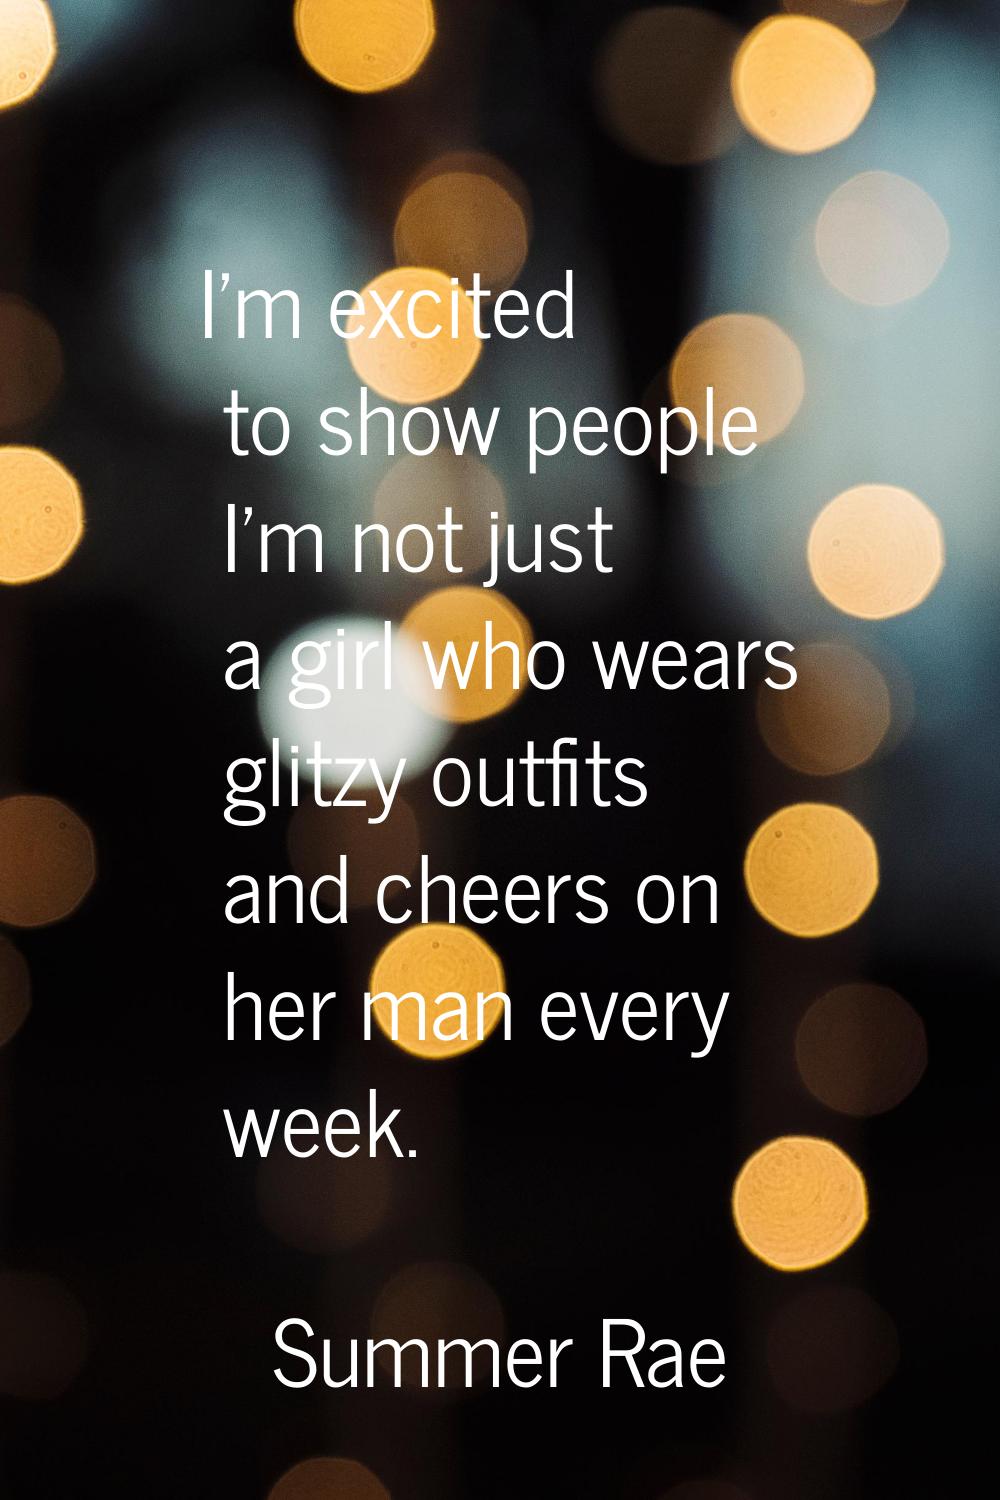 I'm excited to show people I'm not just a girl who wears glitzy outfits and cheers on her man every